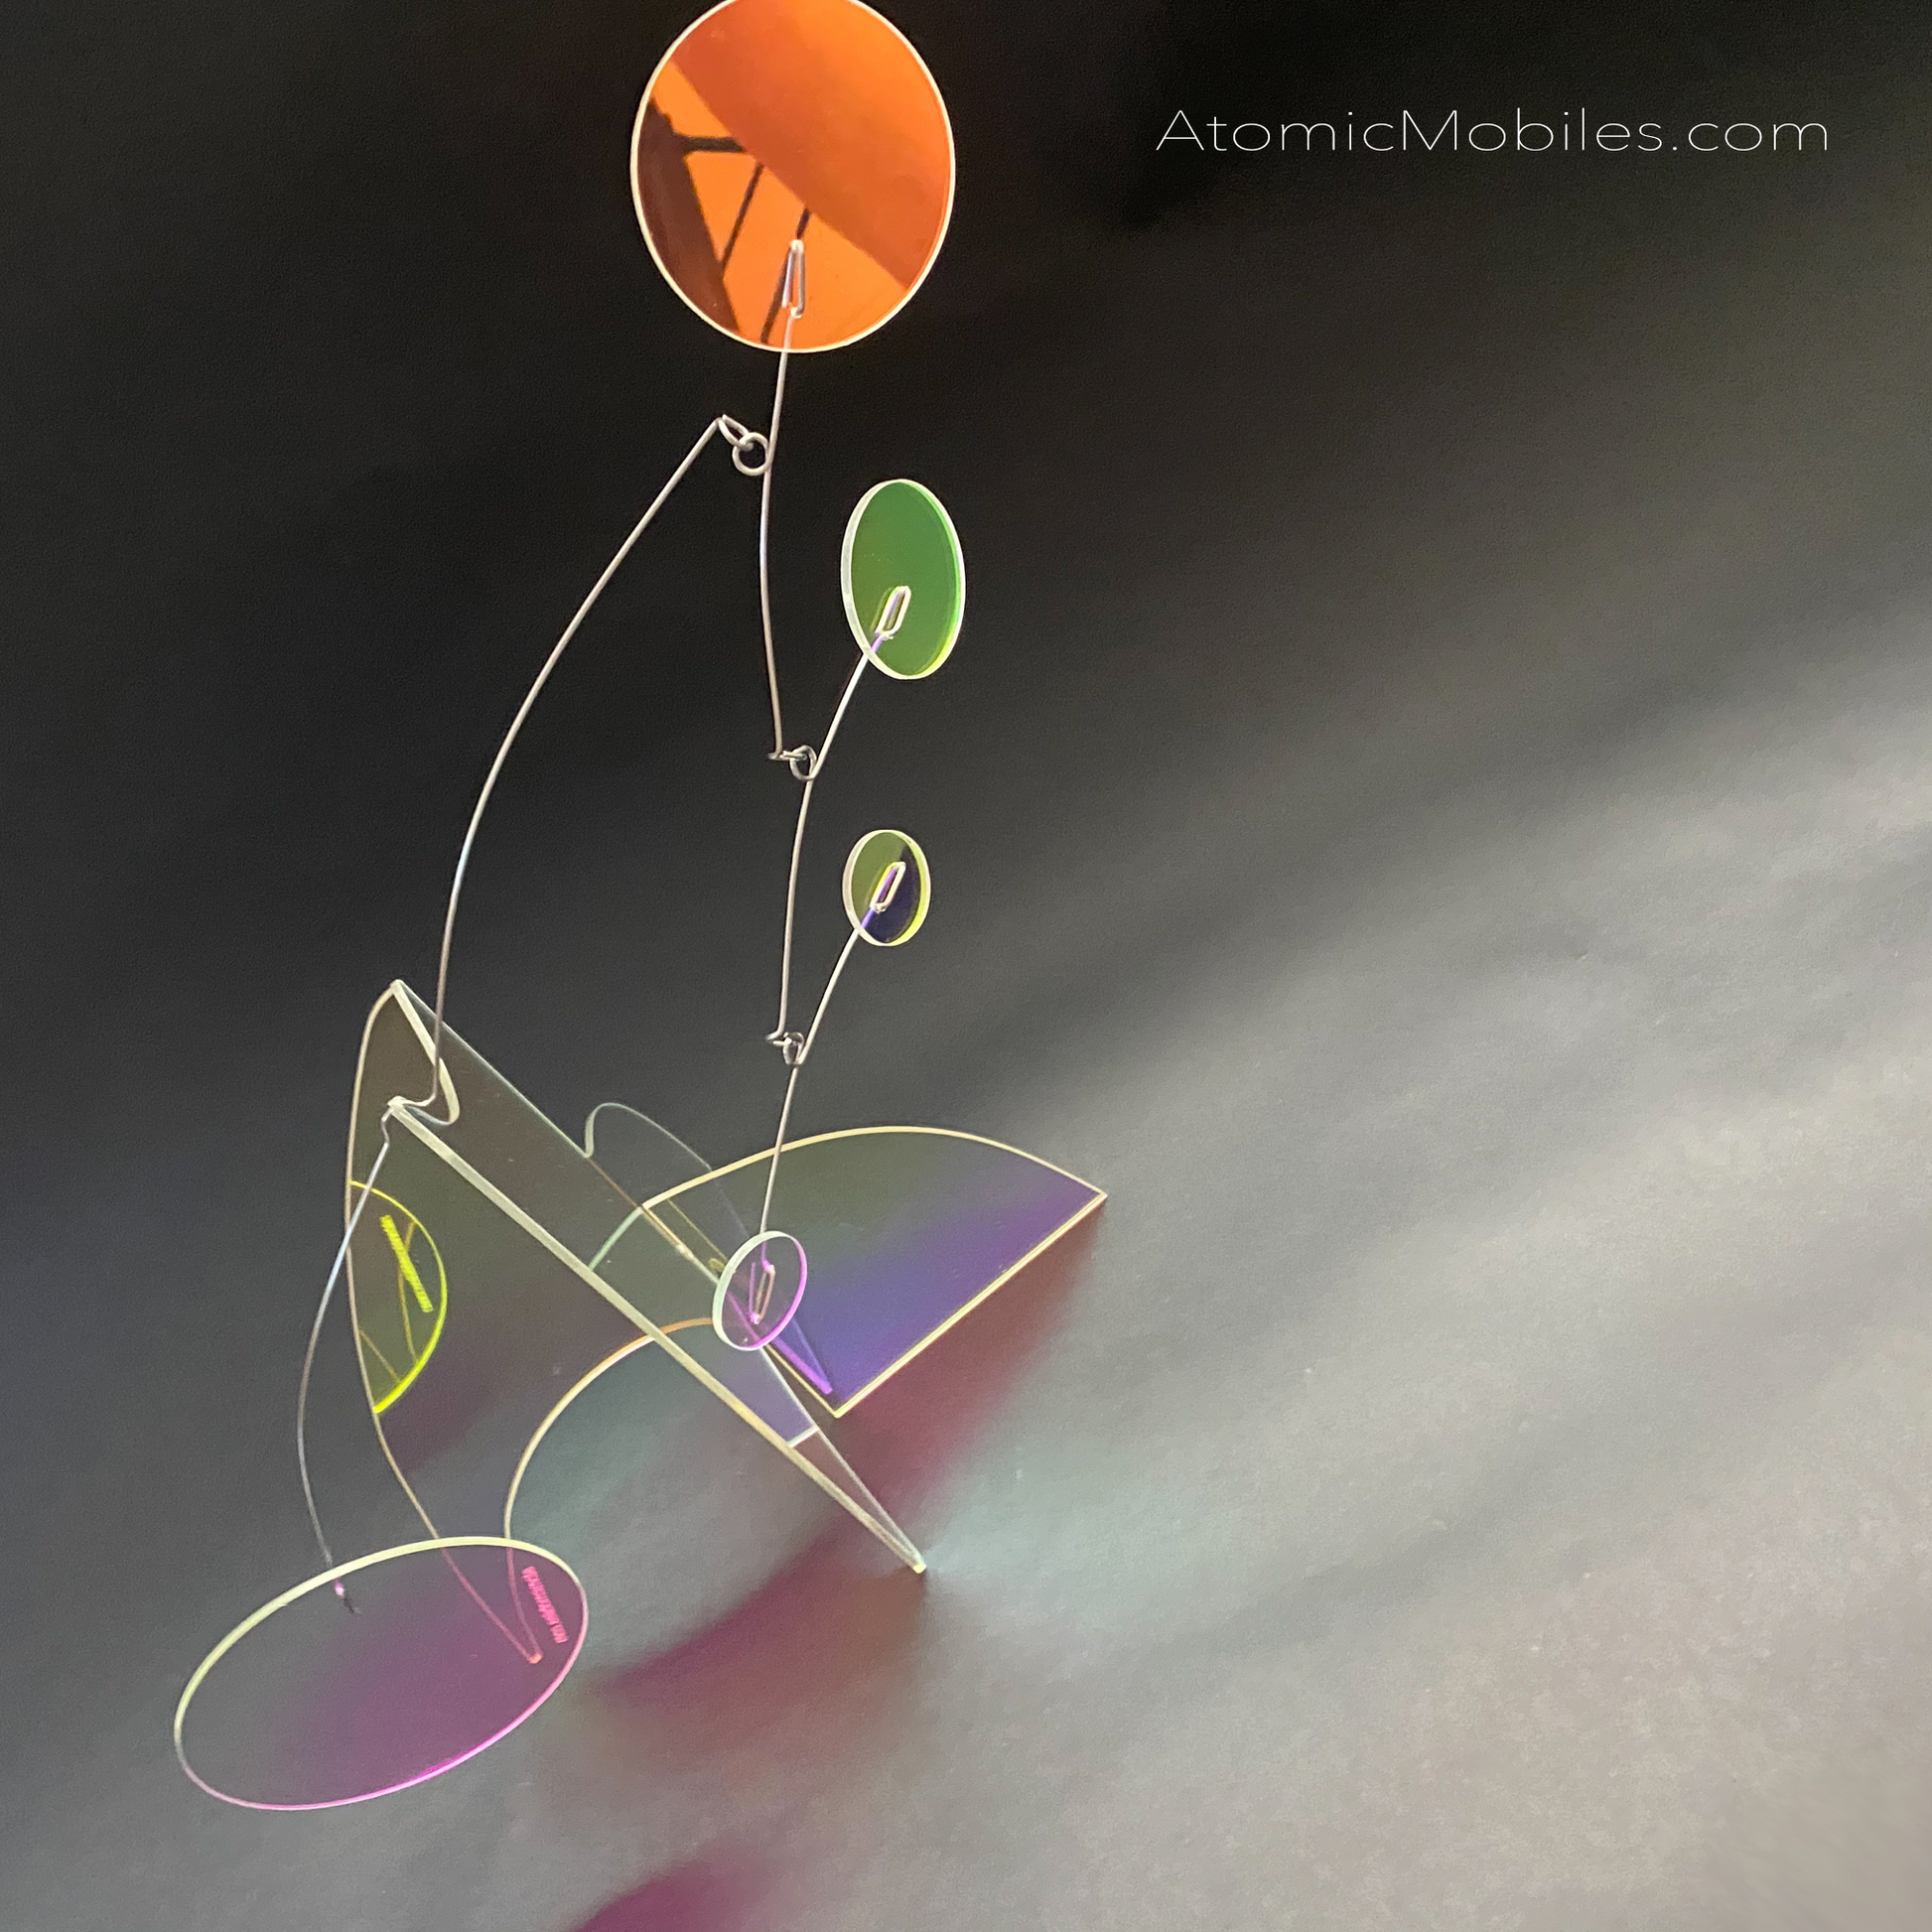 Fascinating prism iridescent modern art stabile sculpture by AtomicMobiles.com